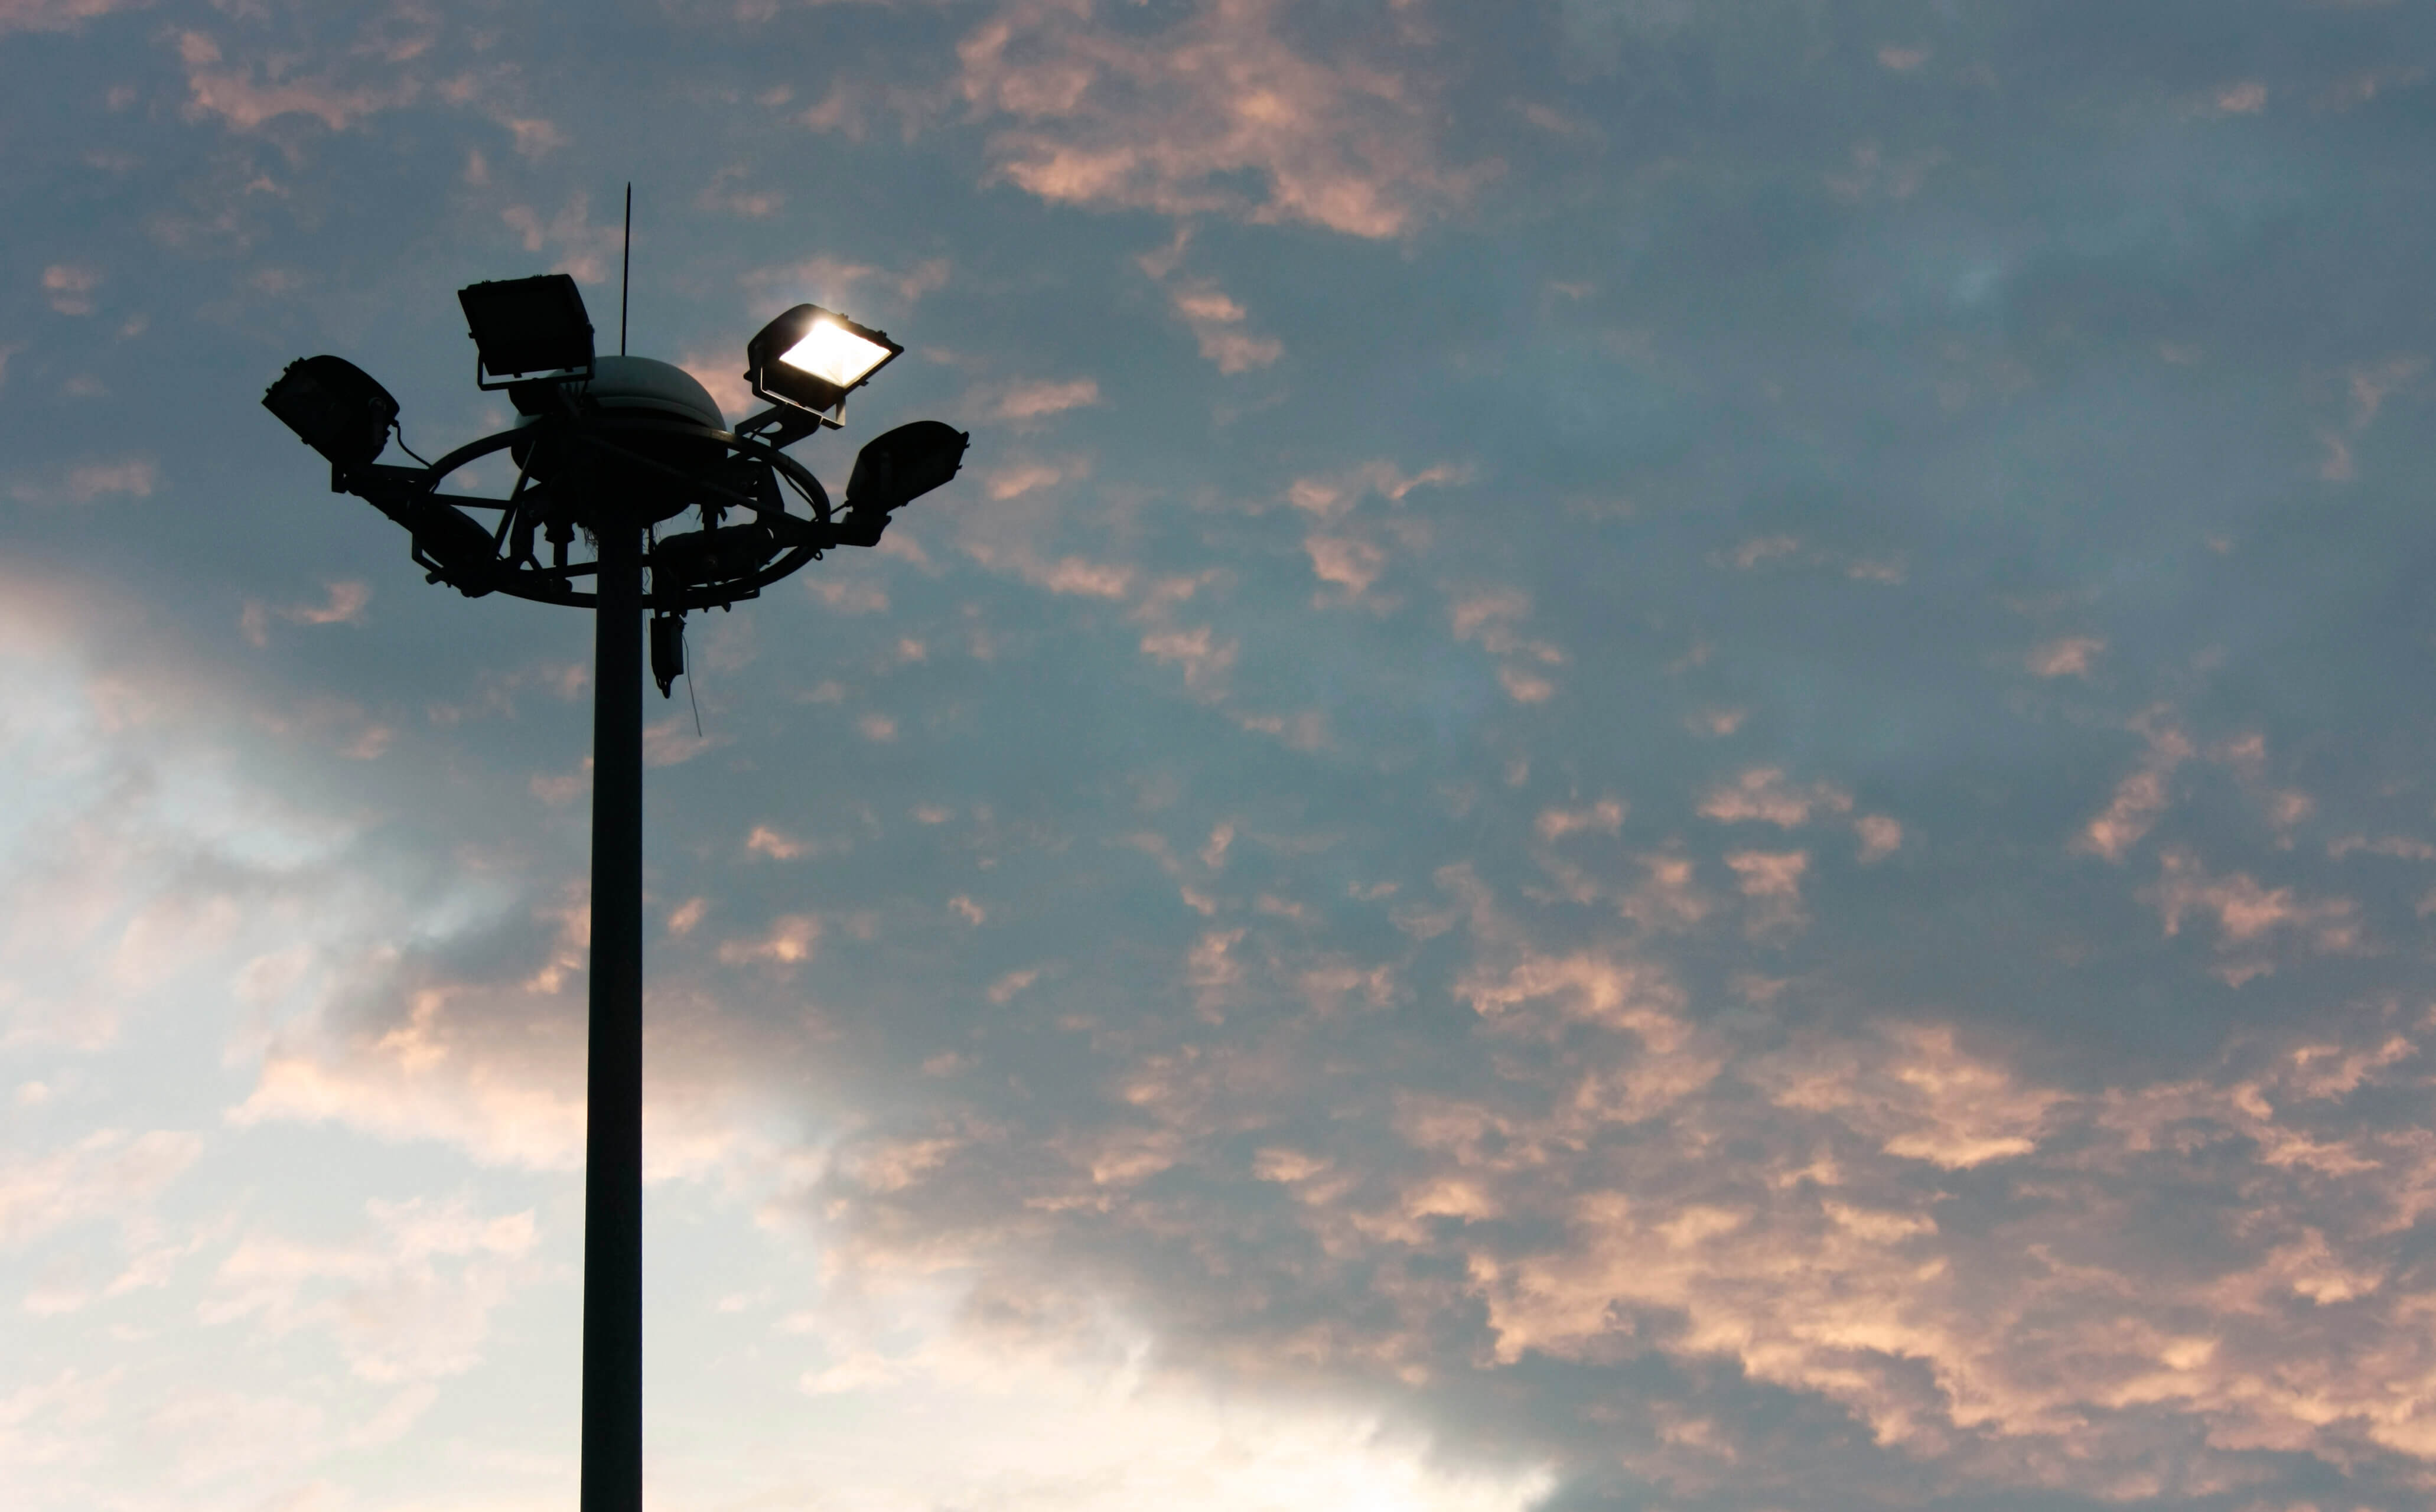 A shot from below of an LED flood light against a moody evening sky.